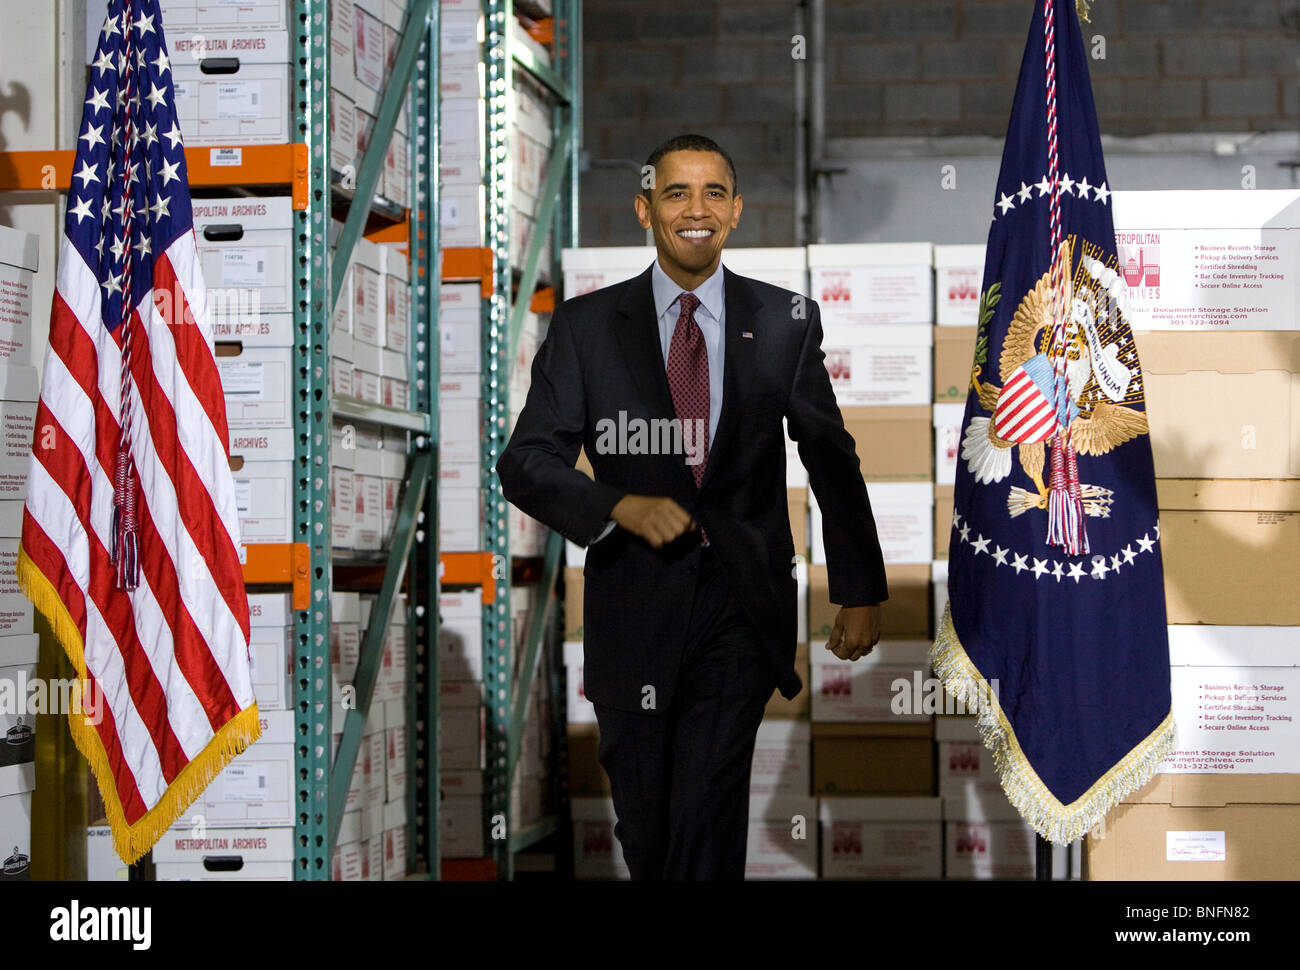 President Barack Obama Speaks at a storage warehouse to promote small business. Stock Photo